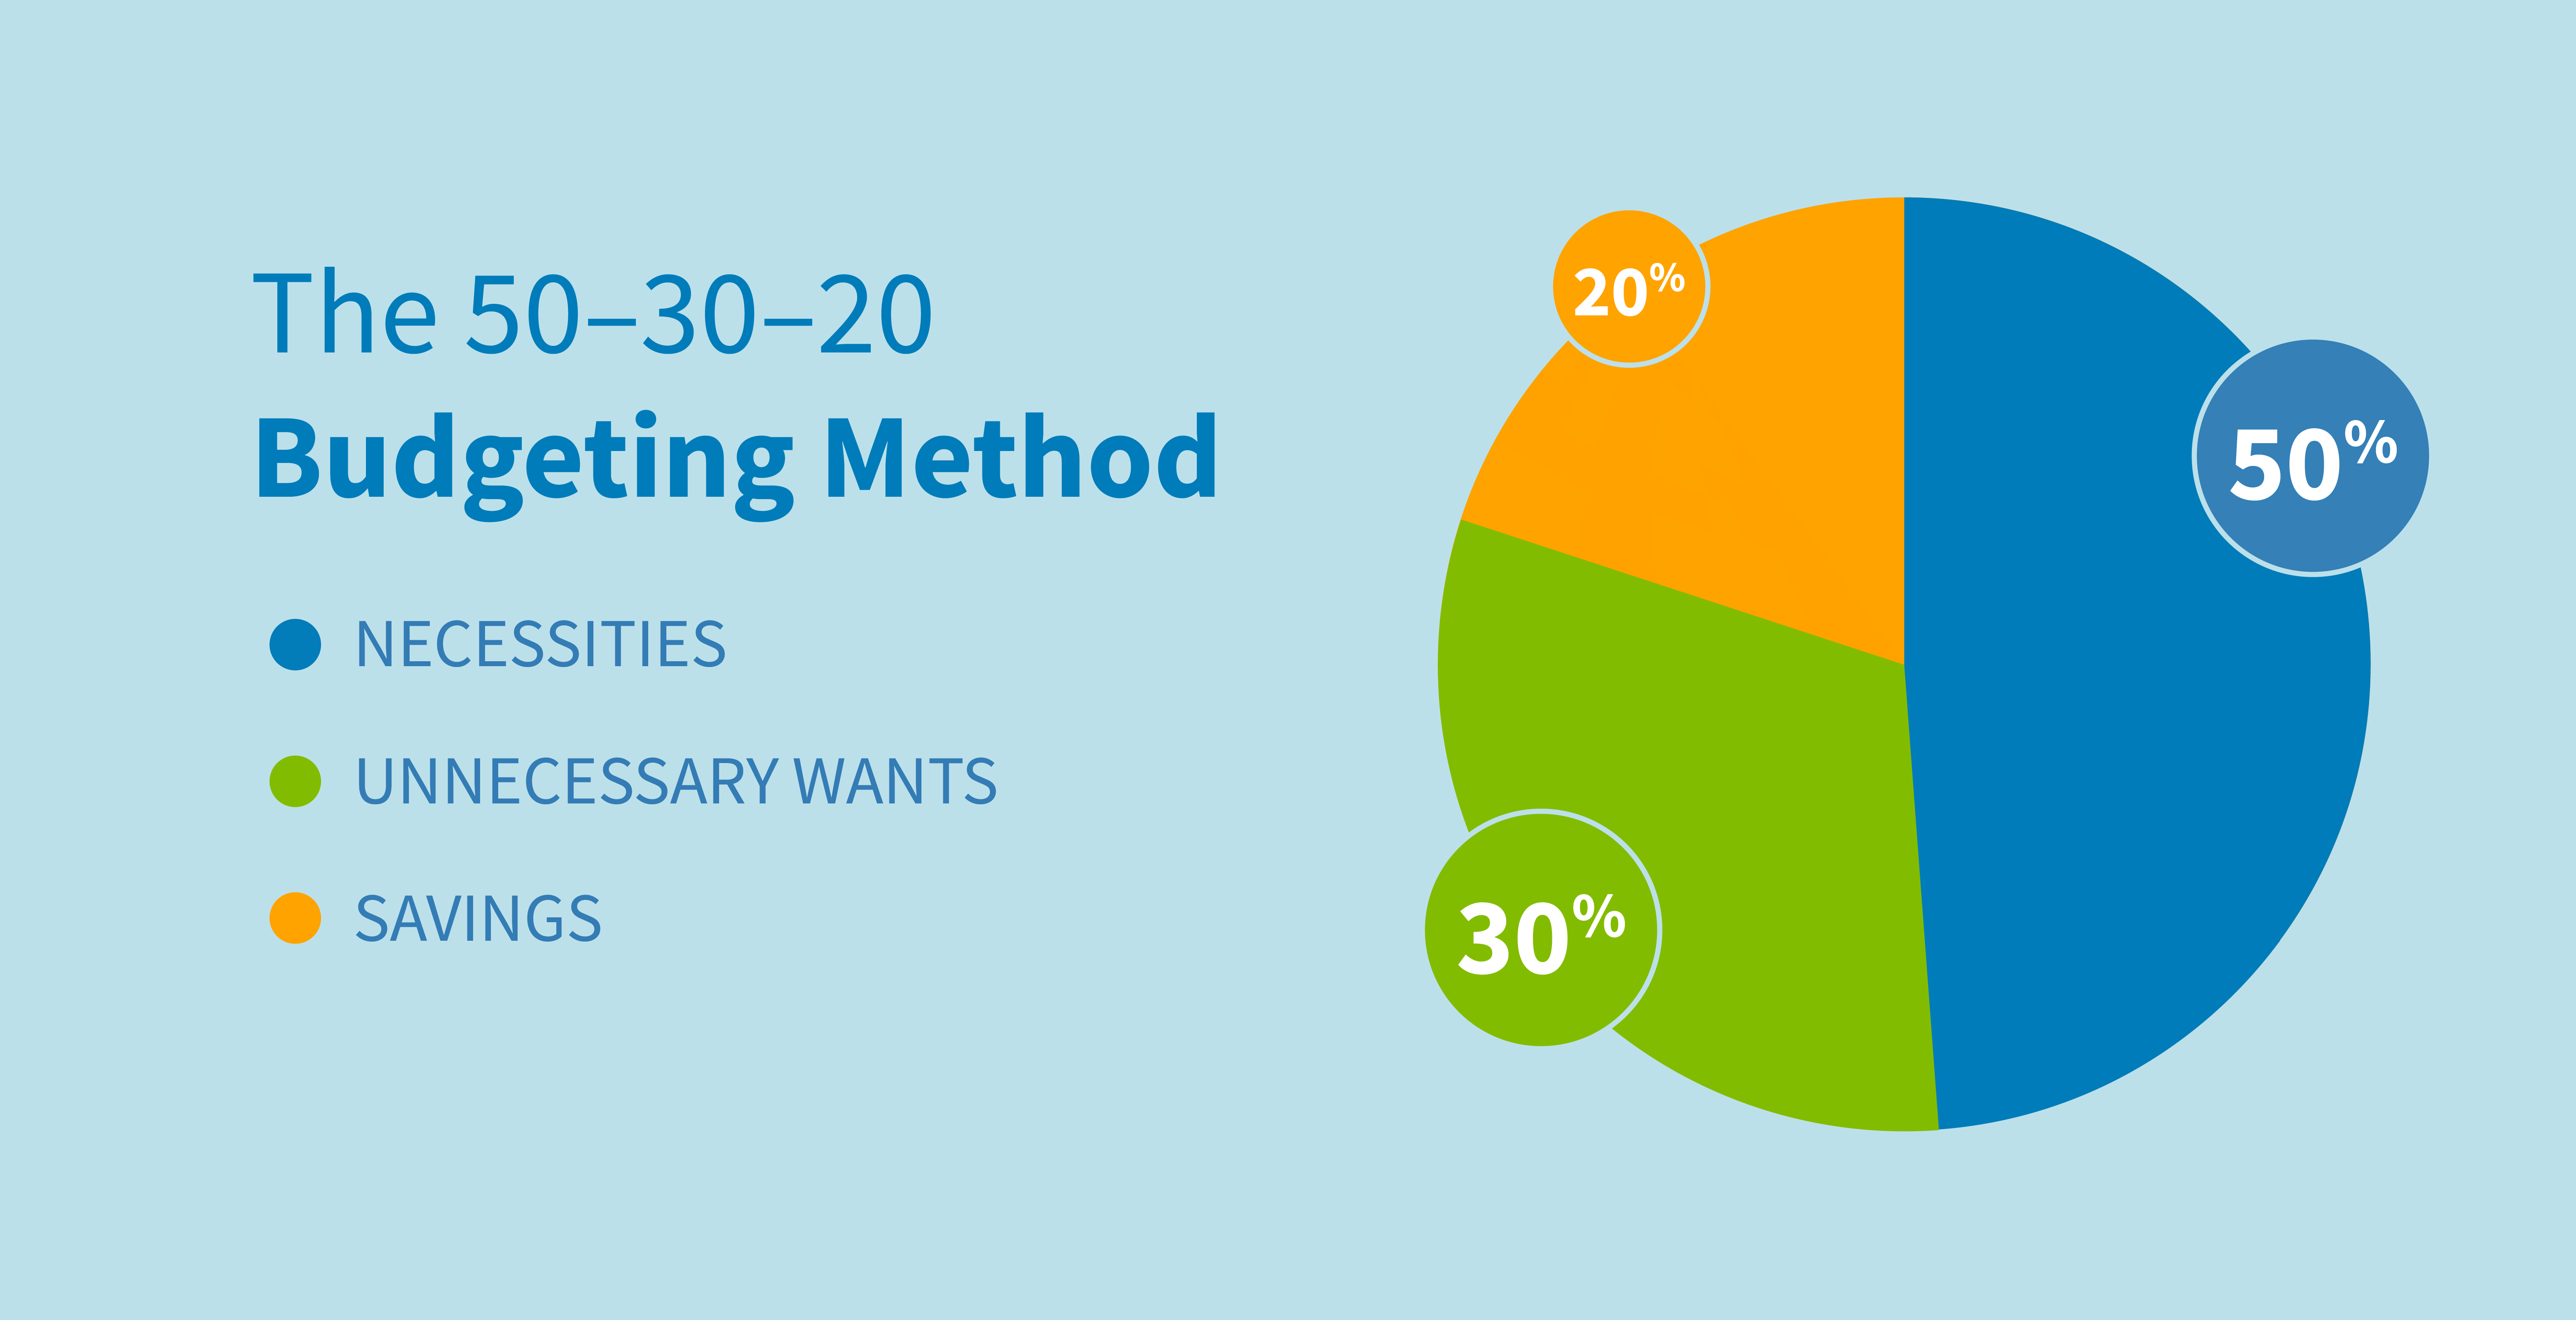 The 50-30-20 Budgeting method allocates 50% of your income to necessities, 30% of your income to unnecessary wants, and 20% of your income to savings.